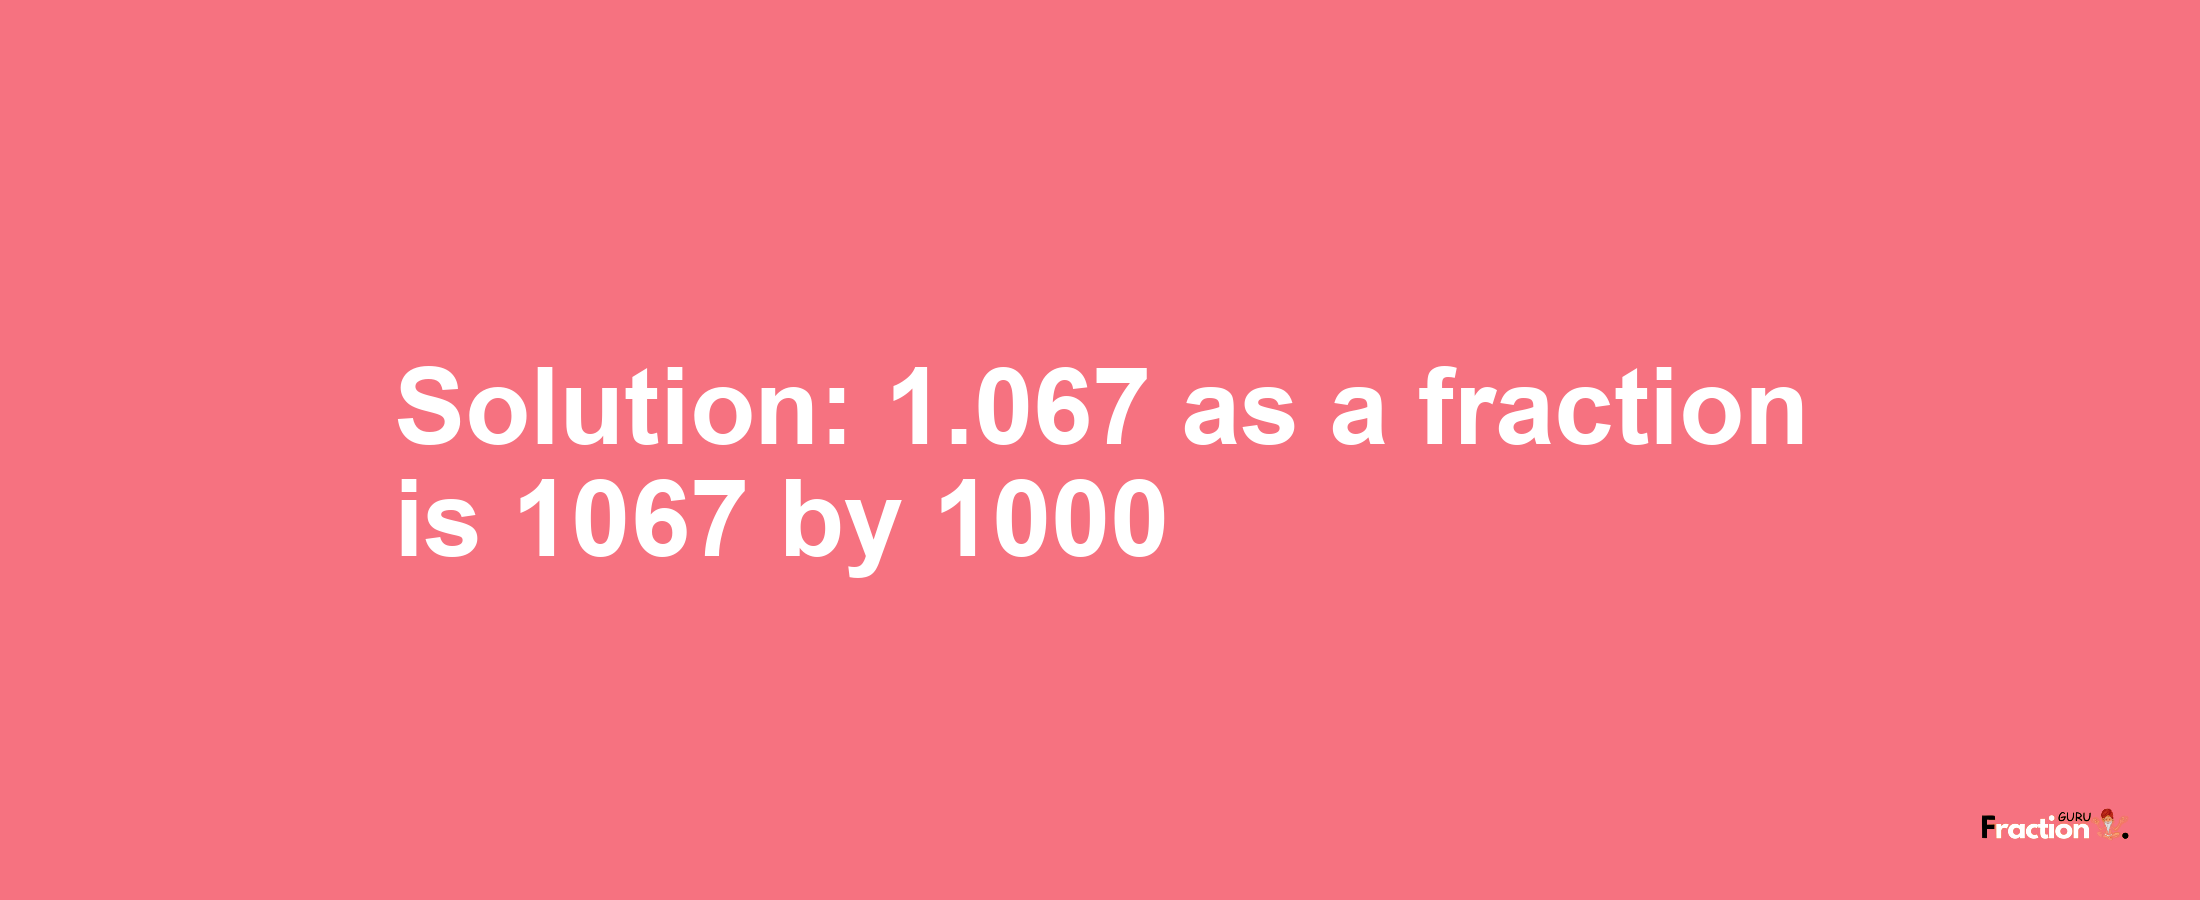 Solution:1.067 as a fraction is 1067/1000